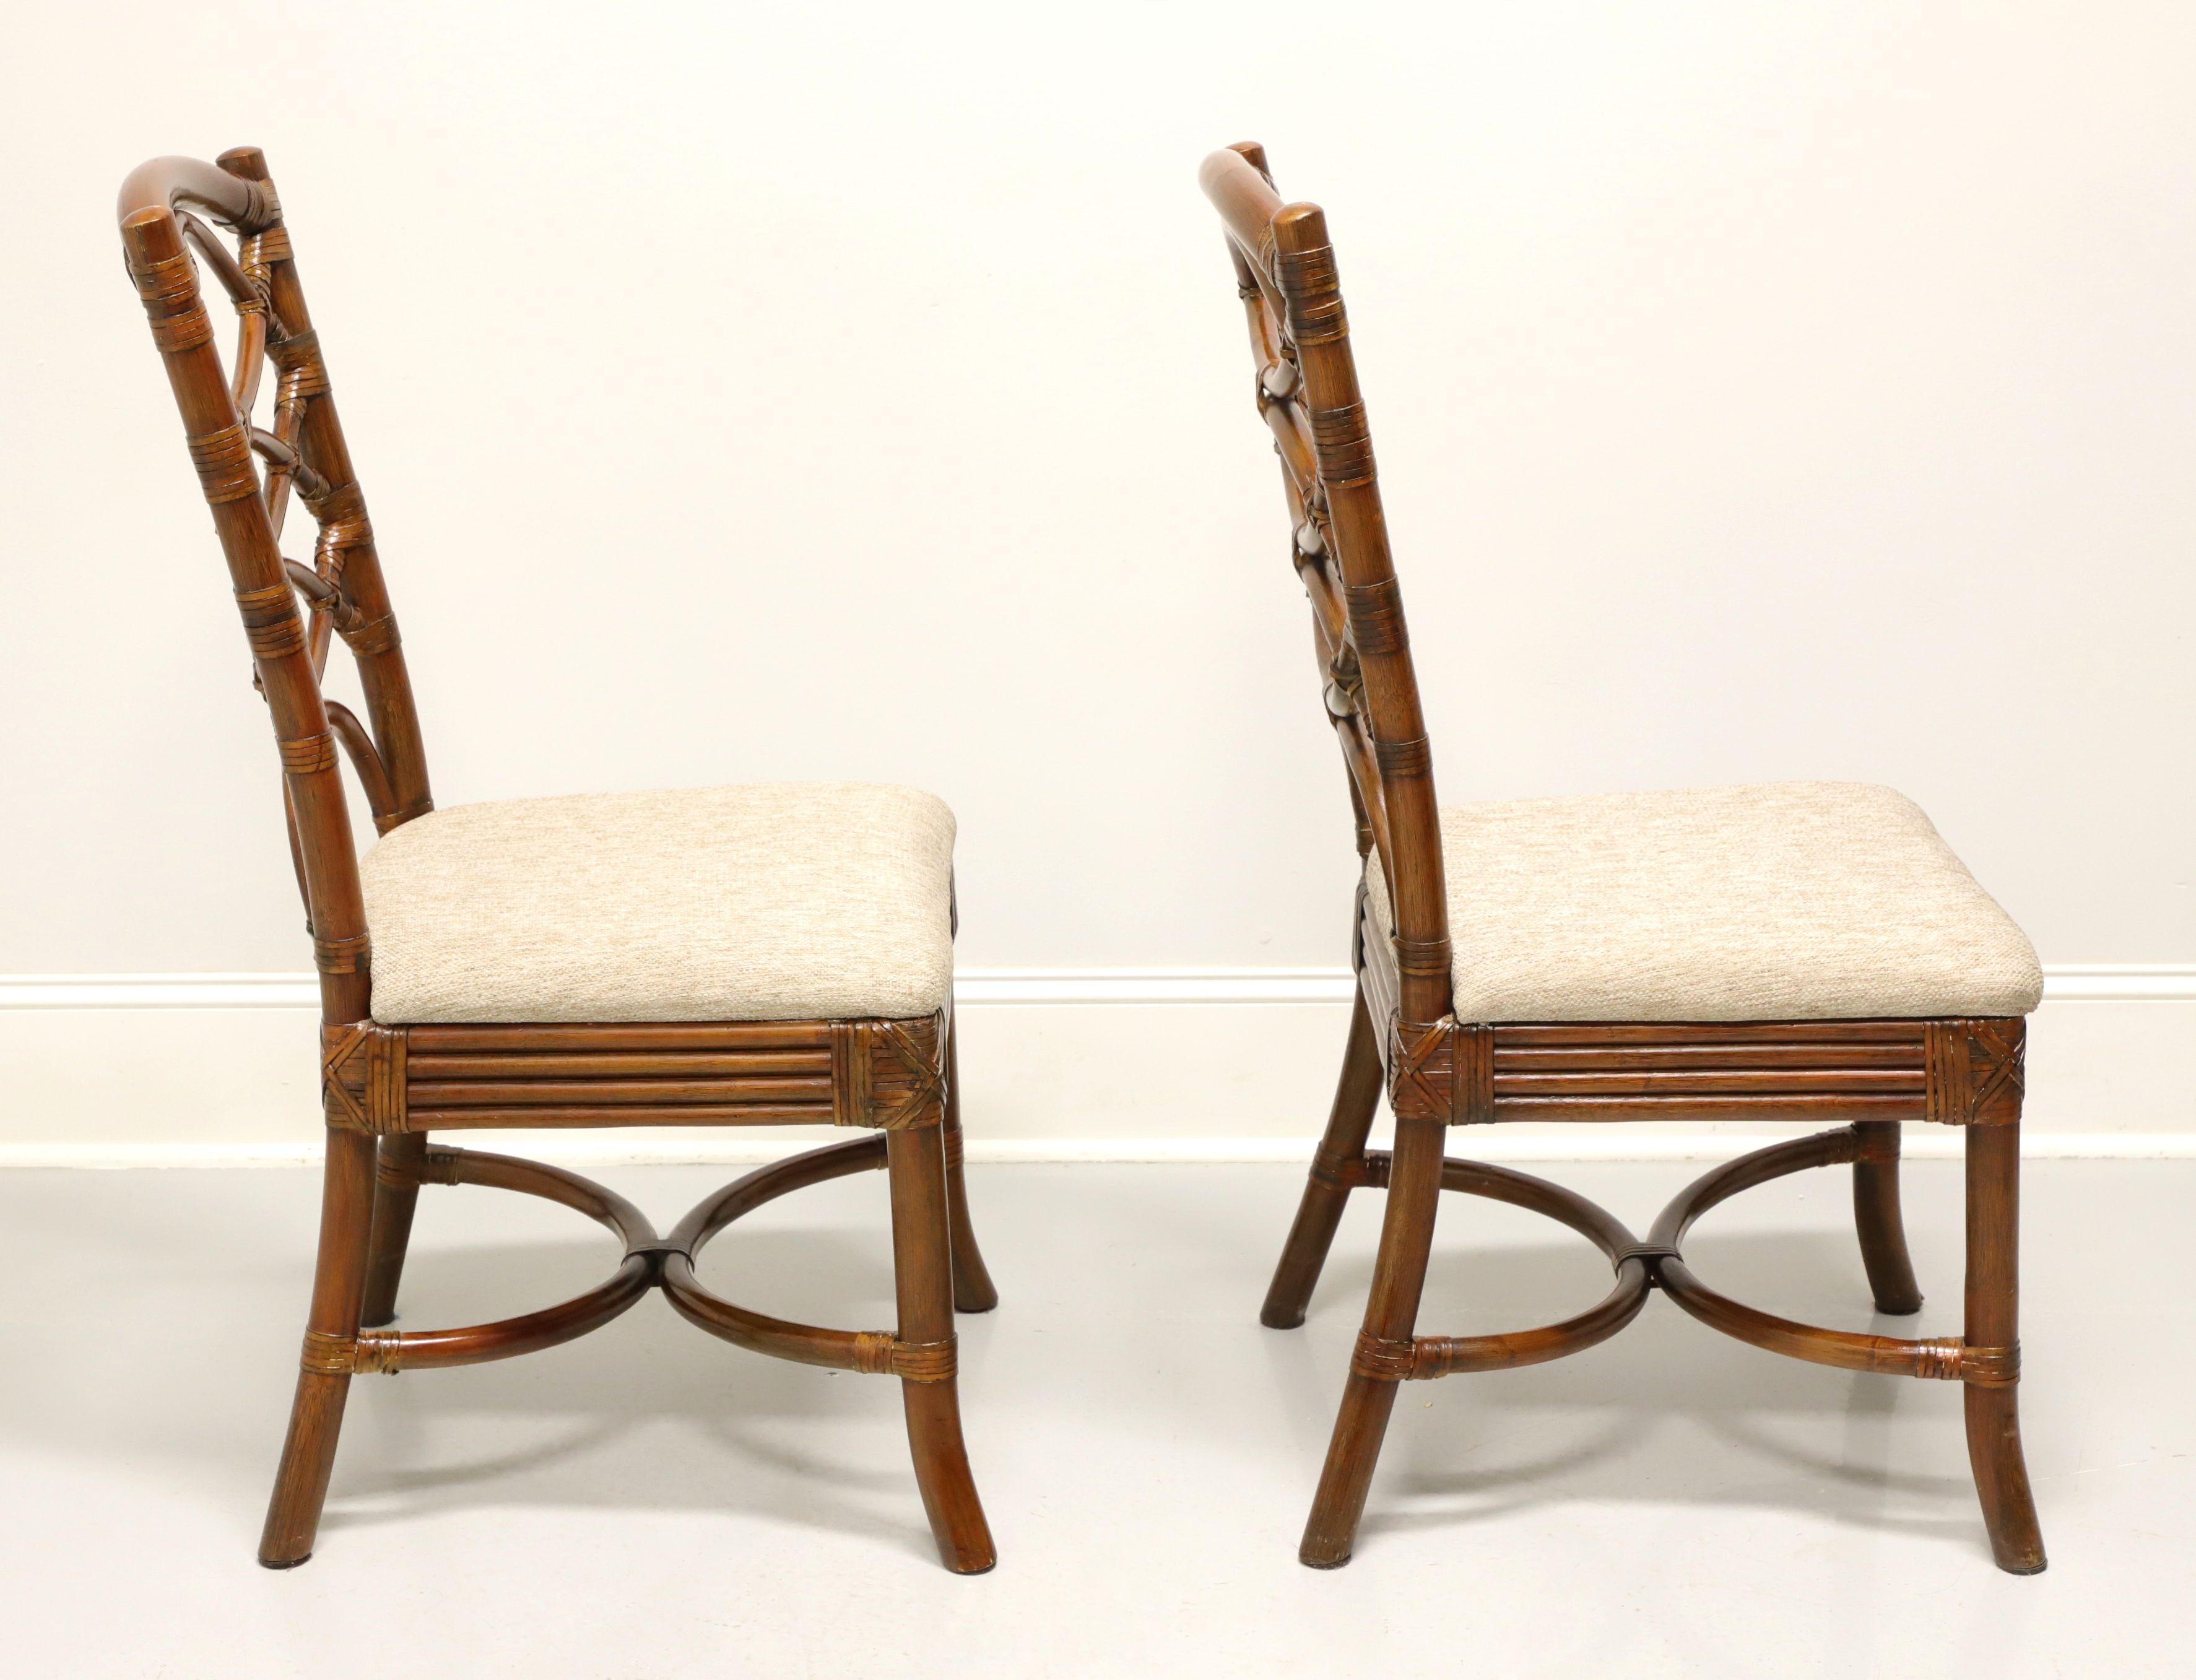 East Asian Faux Bamboo Rattan Asian Influenced Dining Side Chairs - Pair